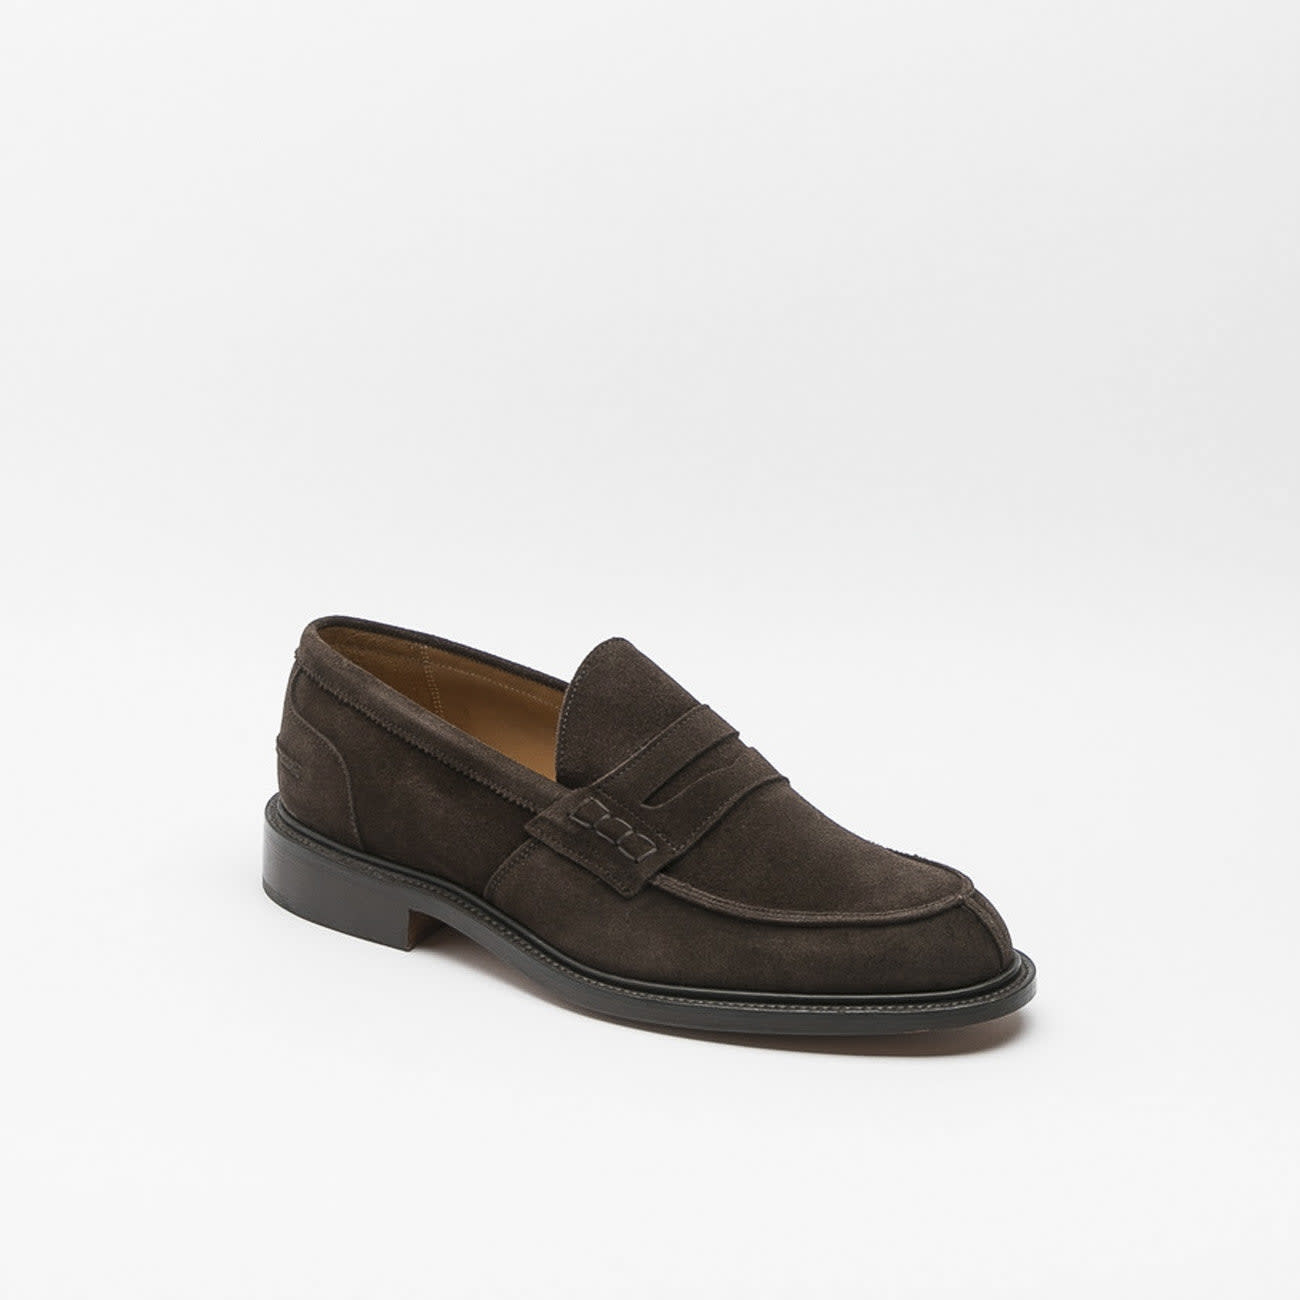 James Coffee Castorino Suede Penny Loafer